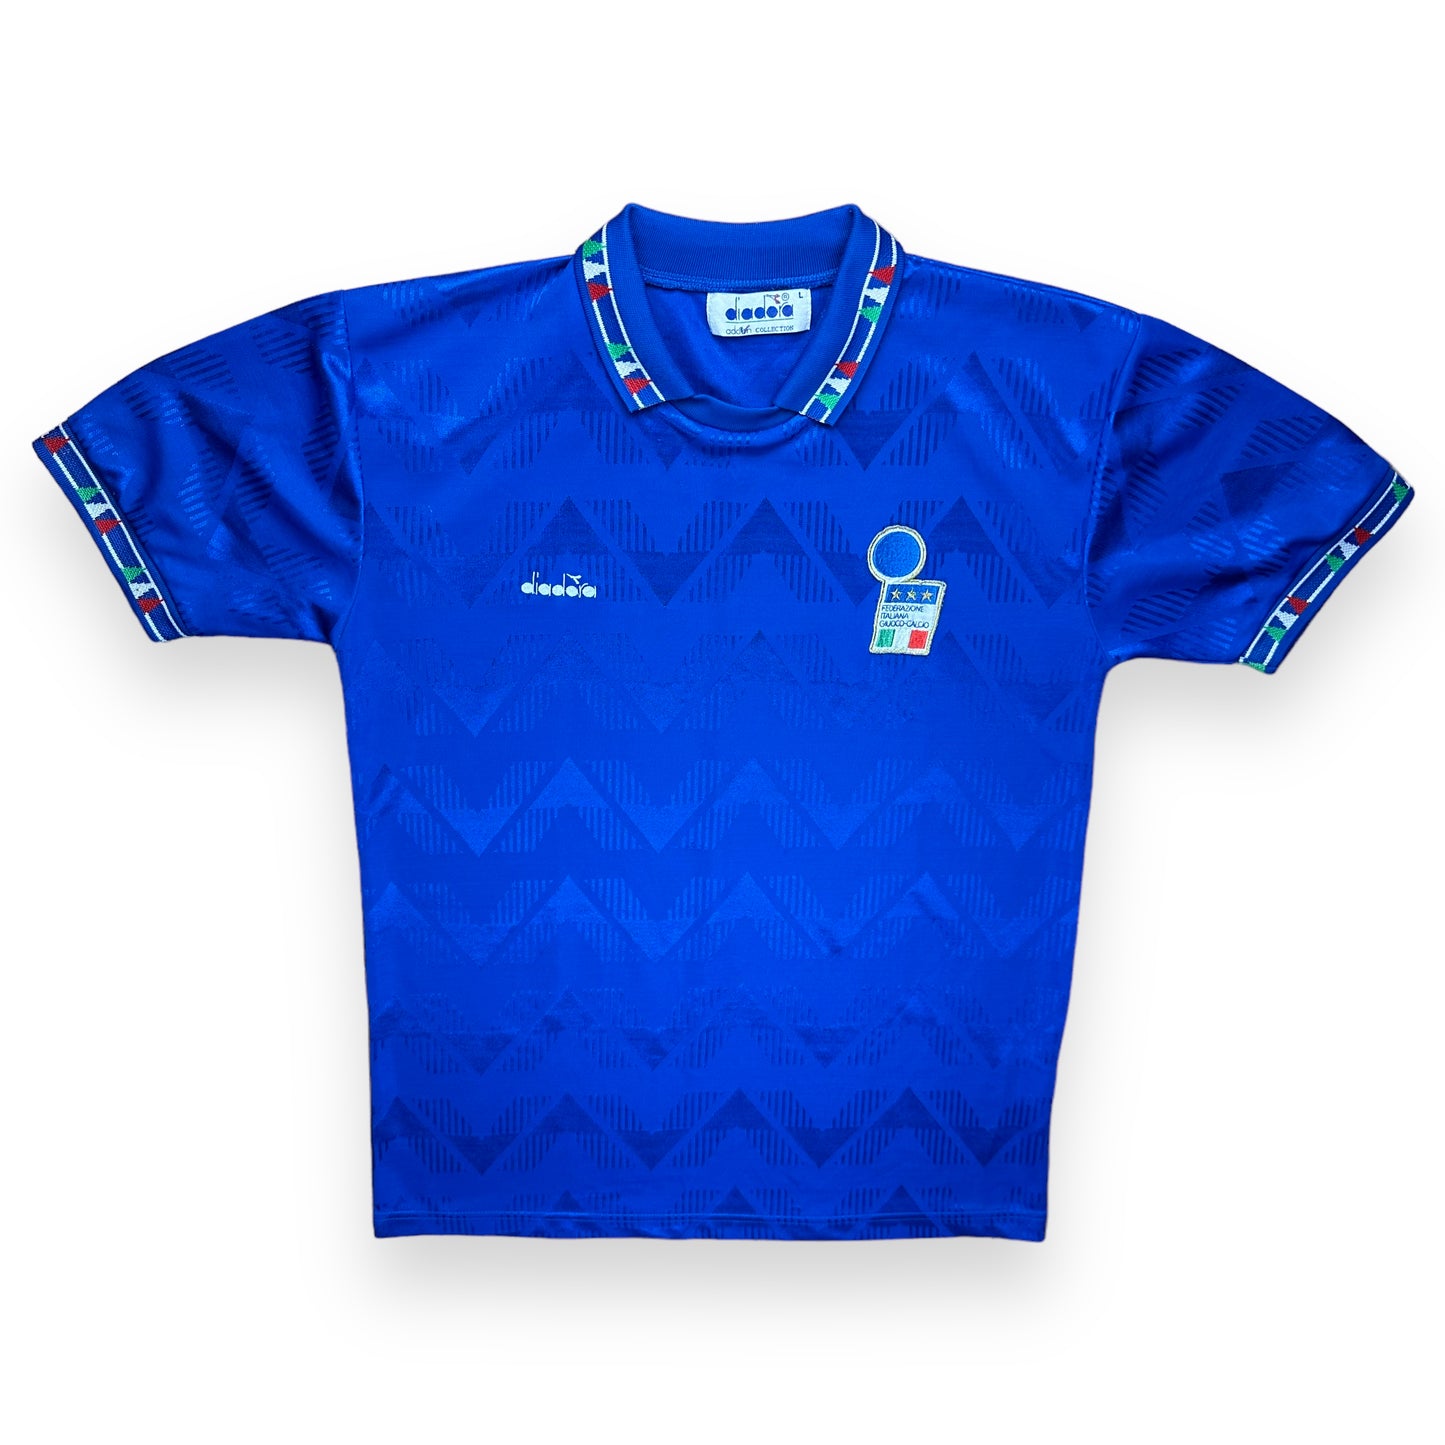 Italy 1992 Home Shirt (L)